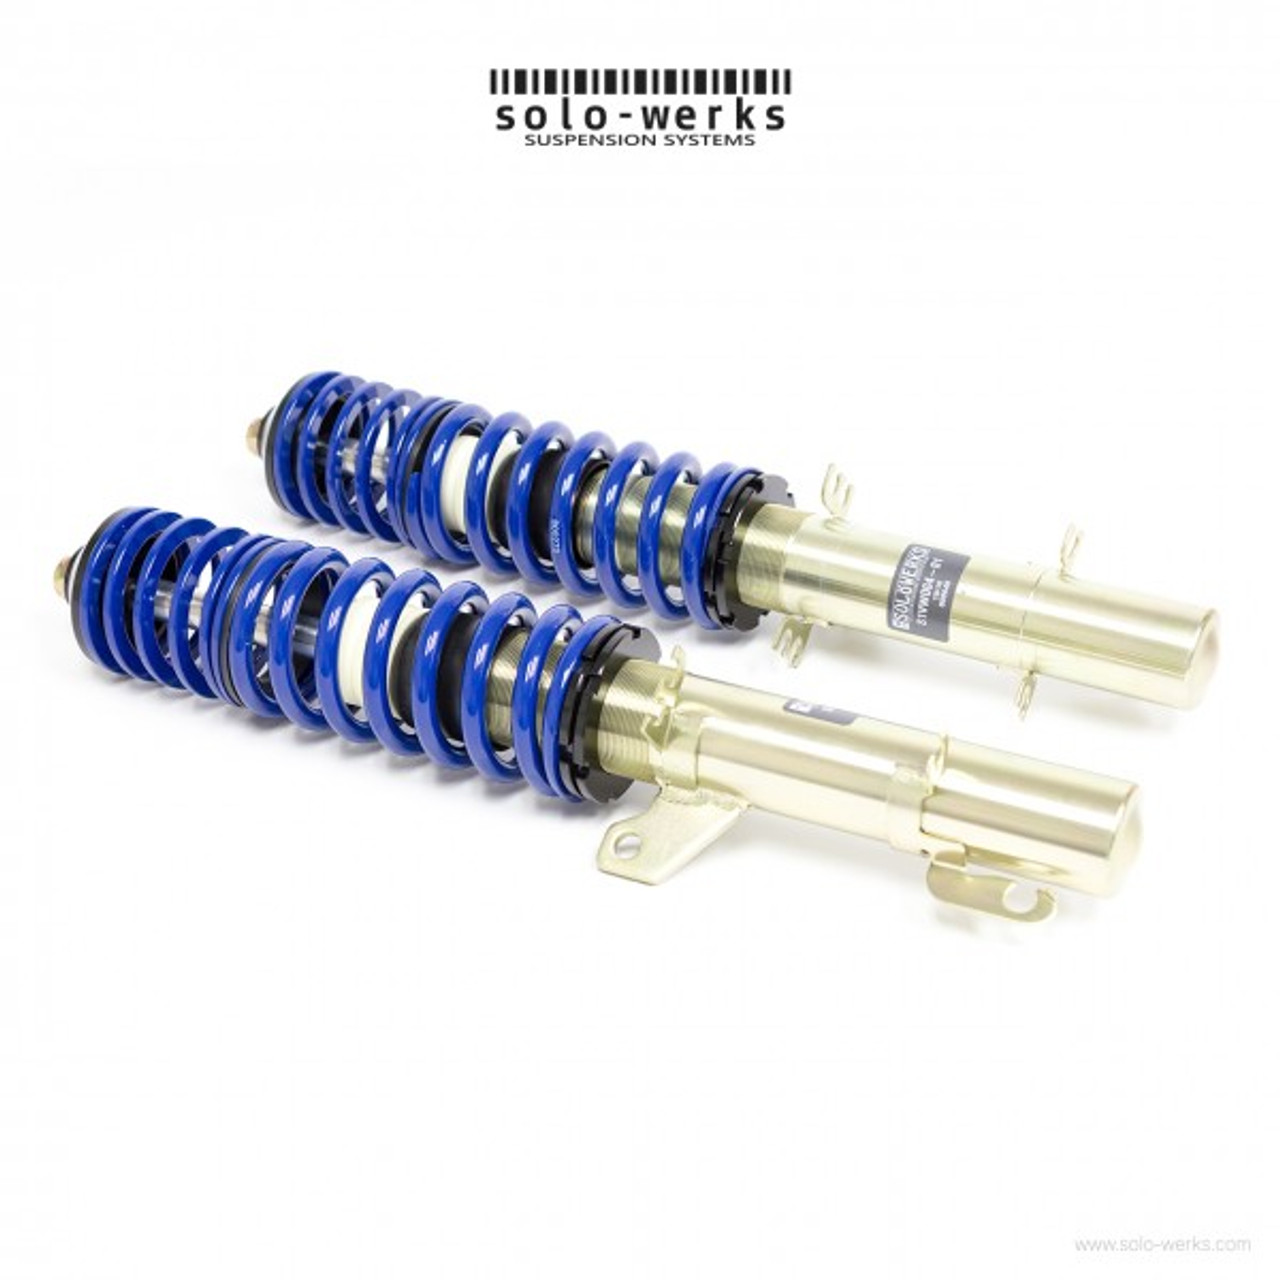 Solo-Werks S1 Coilovers for MK4 Jetta Wagon & New Beetle Convertible